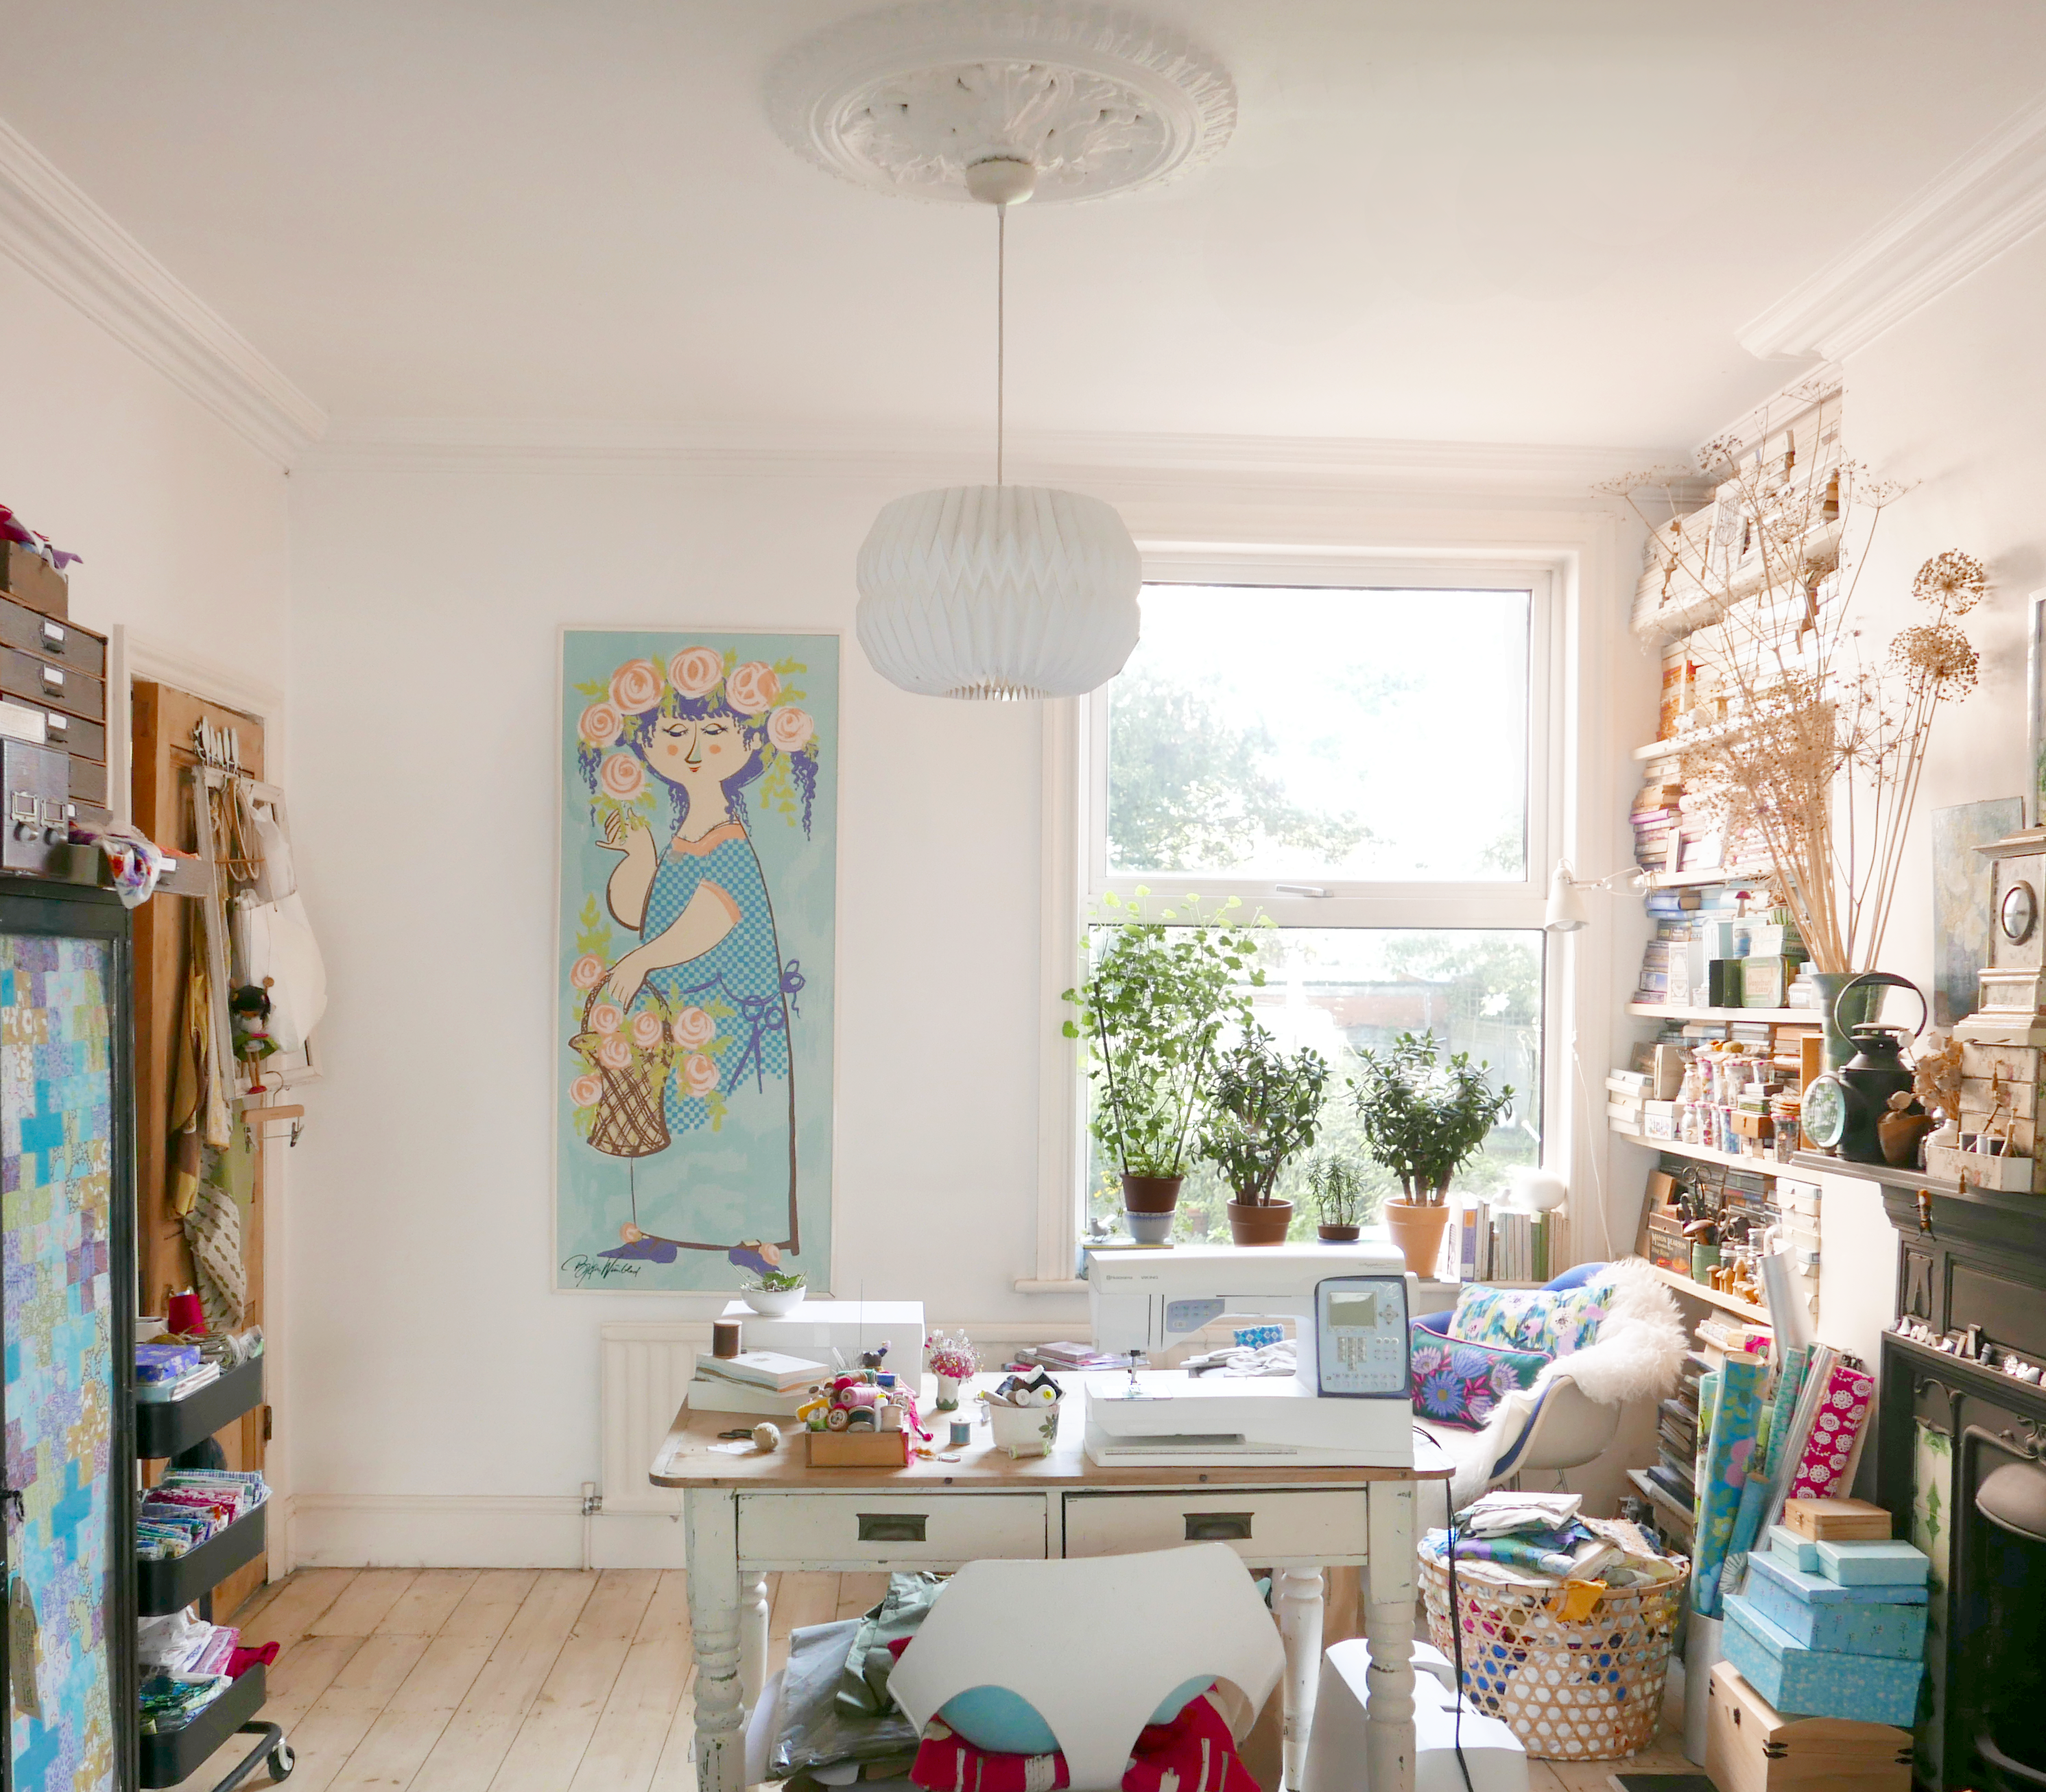 Inside the eclectic home studio Sharon Everest of modflowers